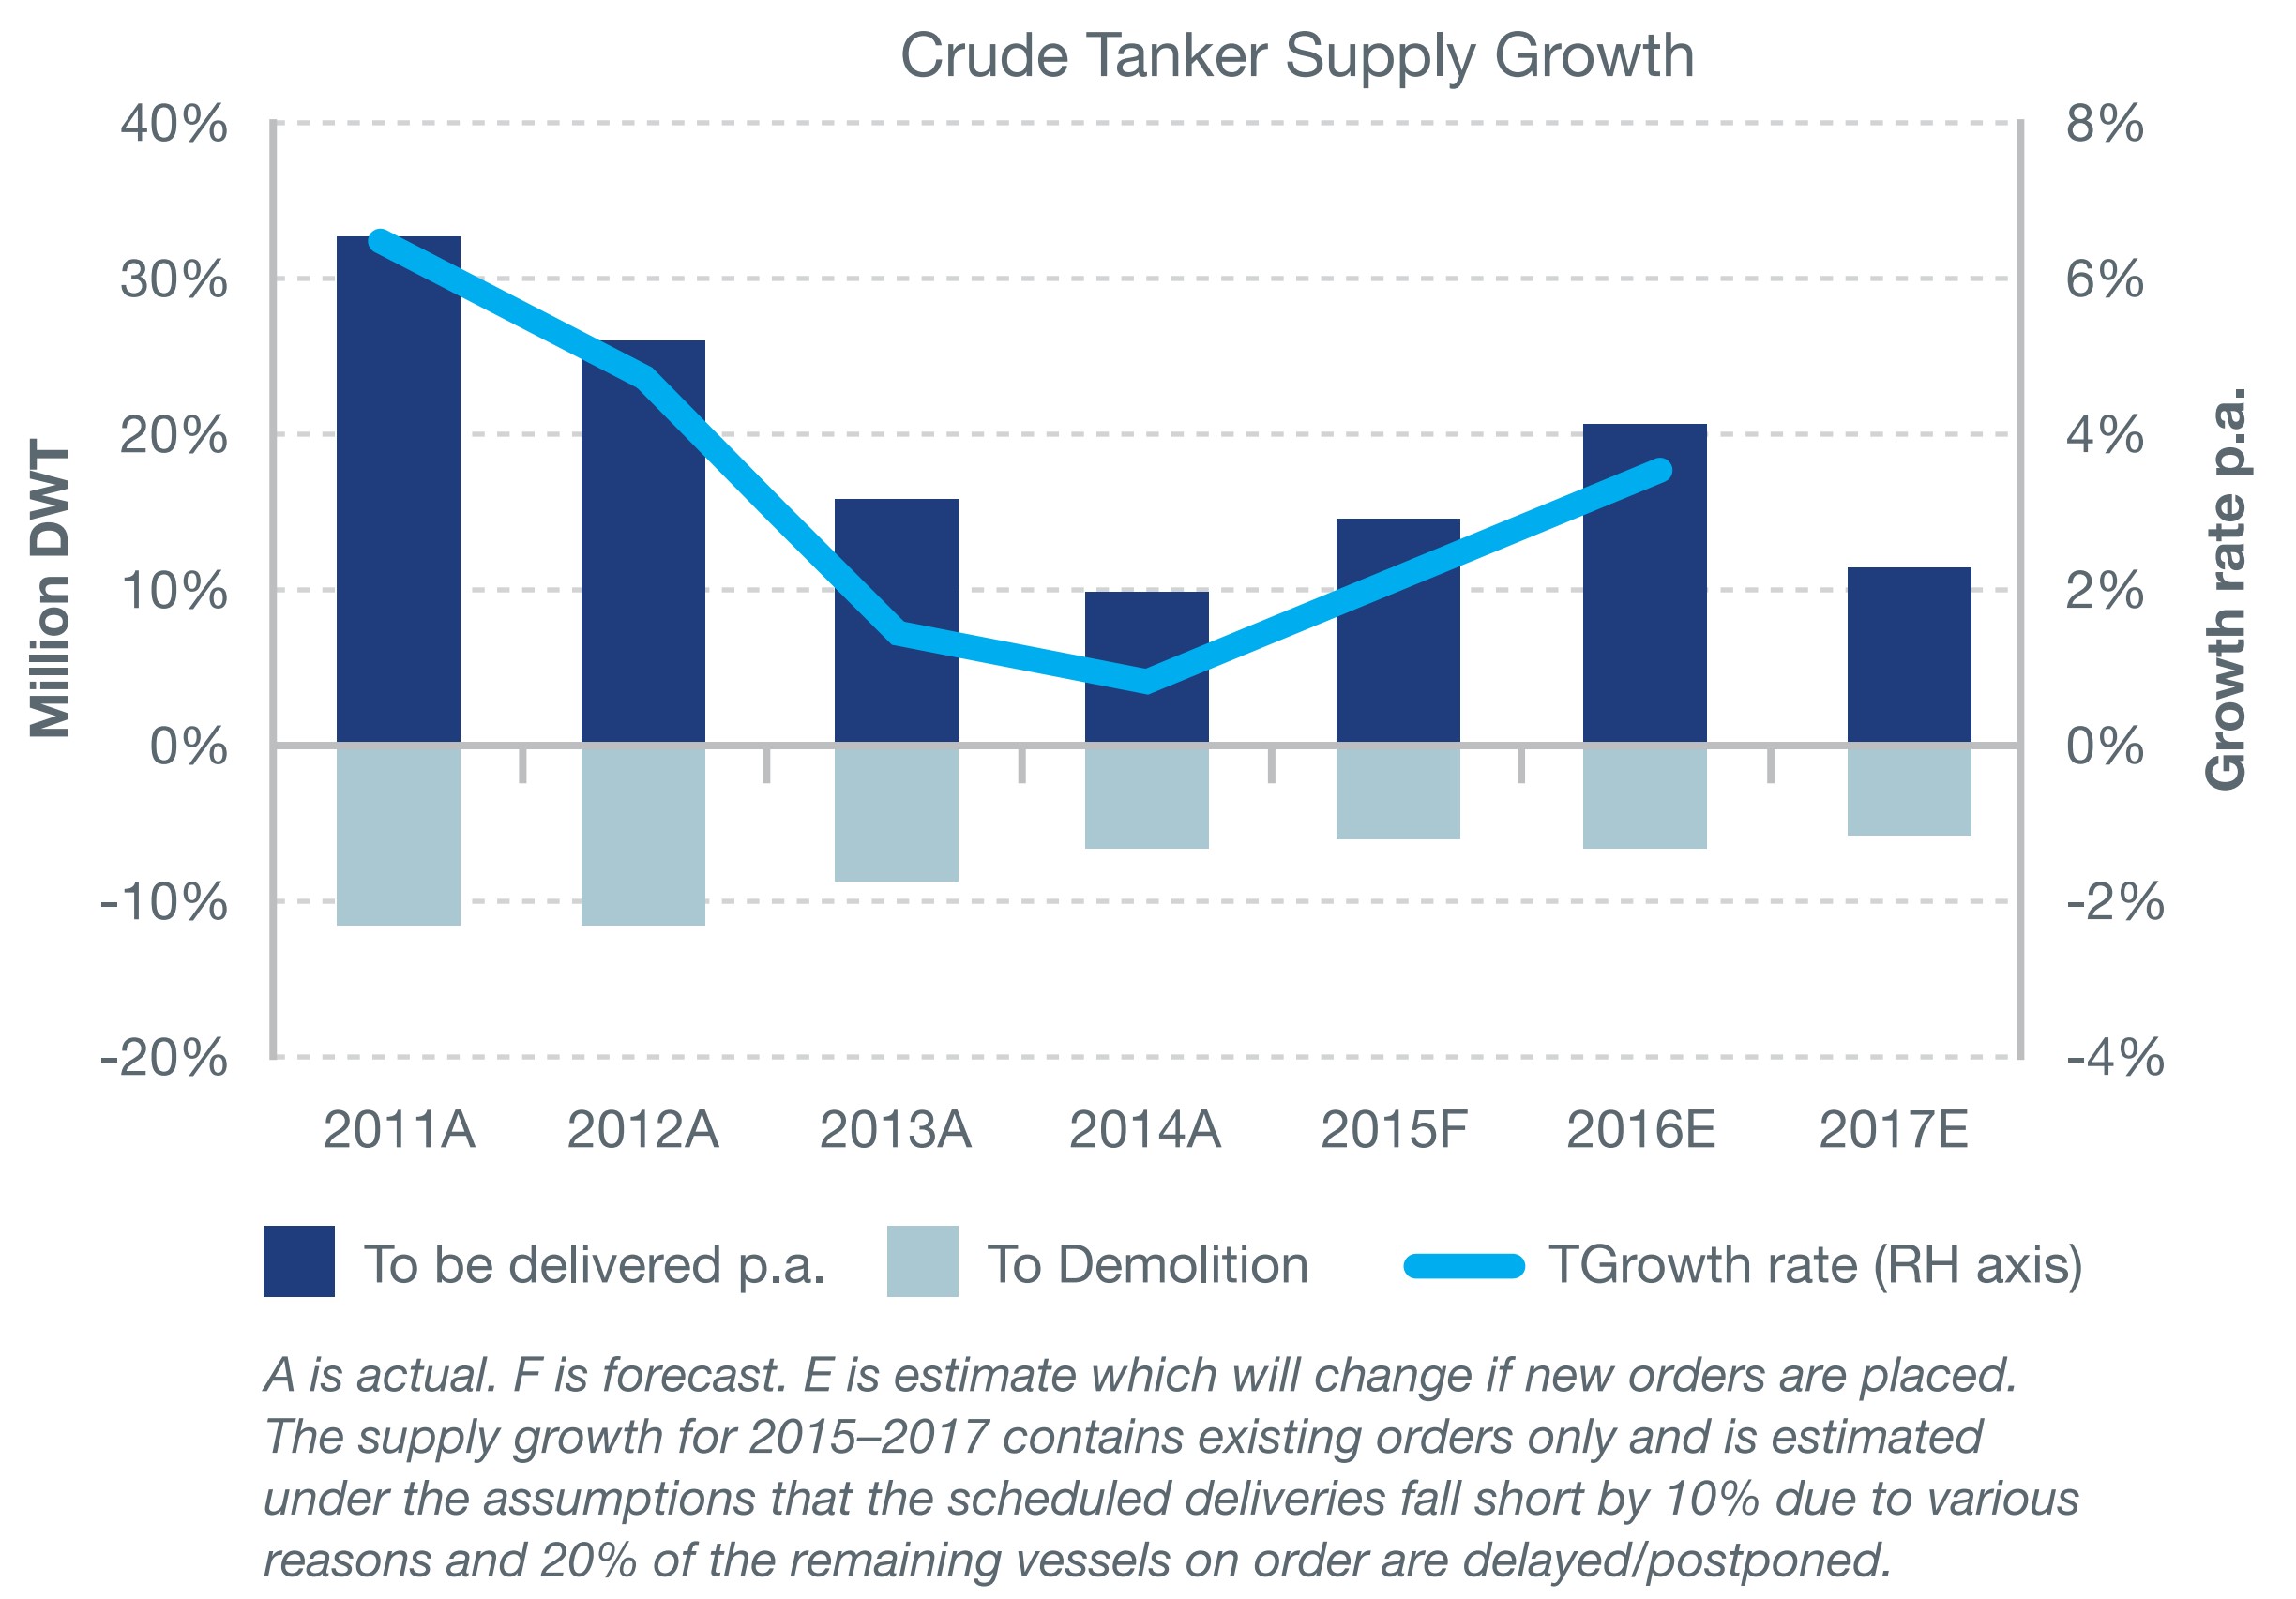 Crude Tanker Supply Growth 2011 to 2016